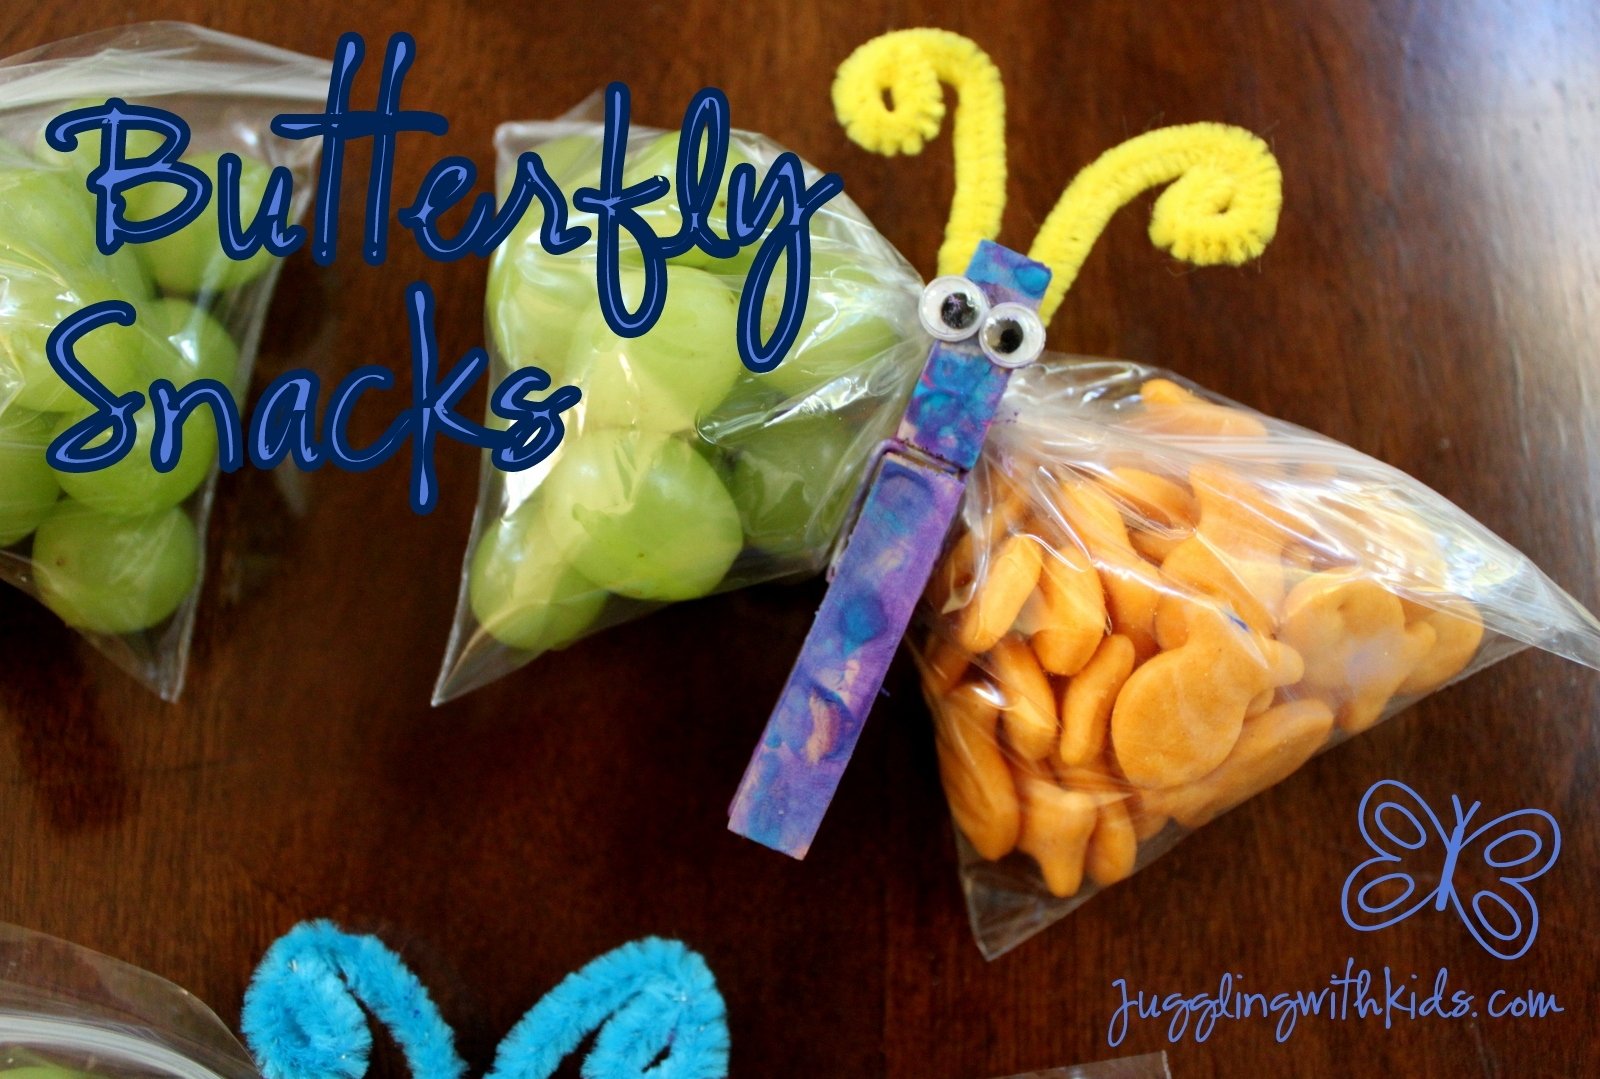 10 Perfect Cute Snack Ideas For Preschoolers butterfly snacks juggling with kids 2022